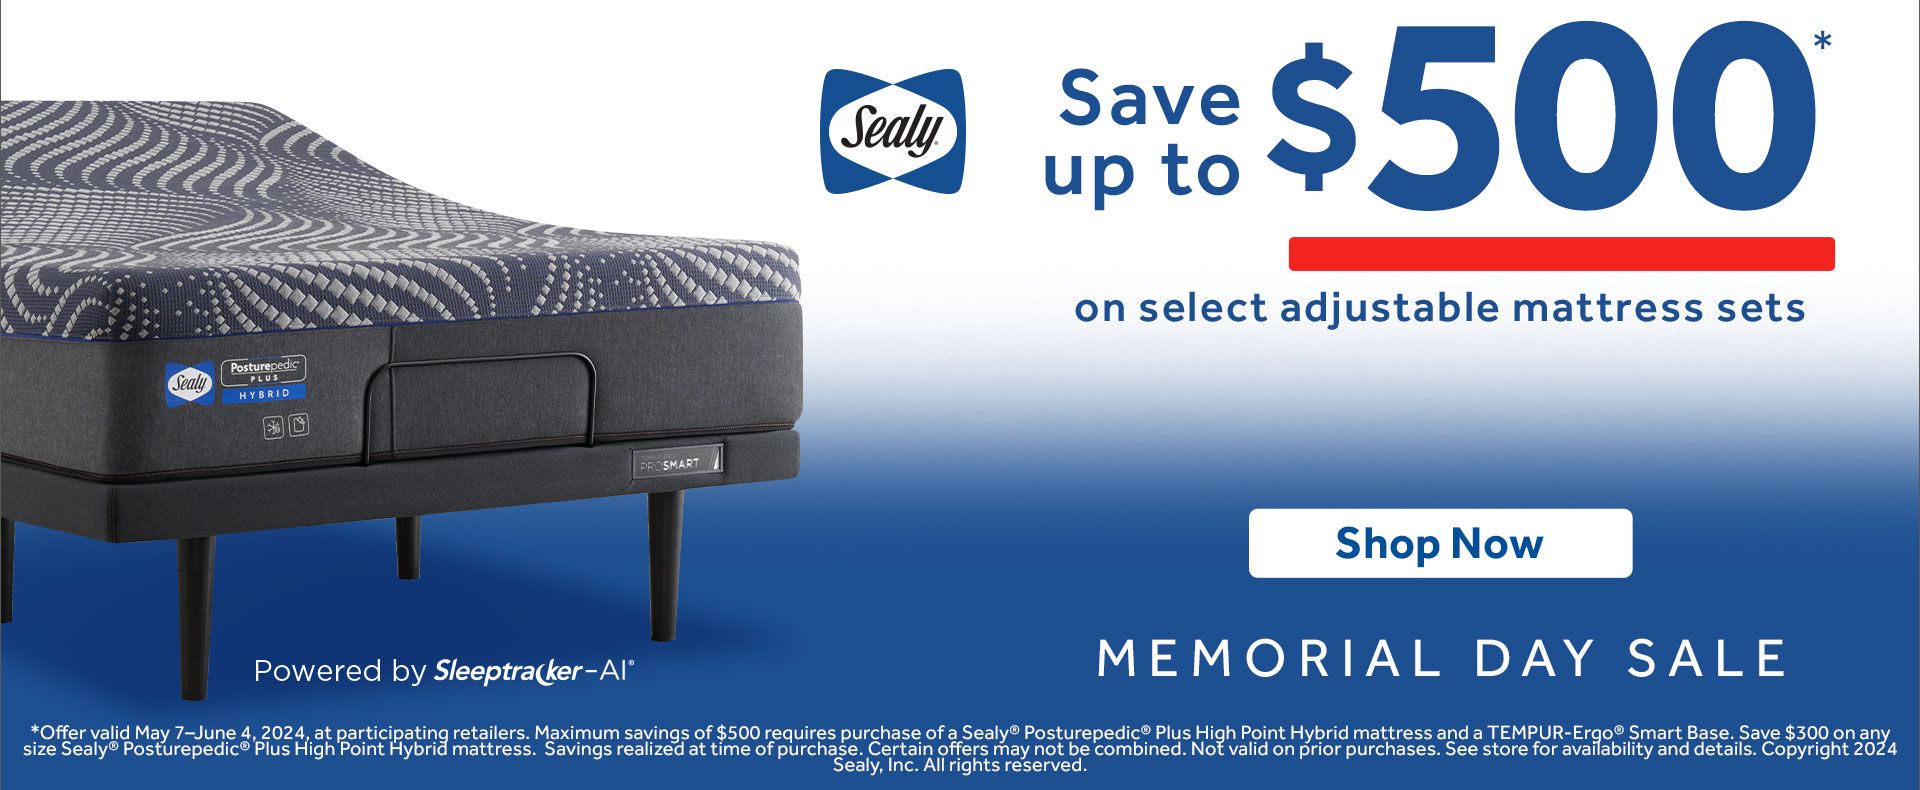 Sealy. Save up to $500 on select adjustable mattress sets. Shop now.  Memorial Day Sale. Powered by Sleeptracker AI. *Offer valid May 7–June 4, 2024, at participating retailers. Maximum savings of $500 requires purchase of a Sealy® Posturepedic® Plus High Point Hybrid mattress and a TEMPUR-Ergo® Smart Base. Select adjustable mattress sets only. Savings realized at time of purchase. Certain offers may not be combined. Not valid on prior purchases. See store for availability and details. Copyright 2024 Sealy, Inc. All rights reserved. 